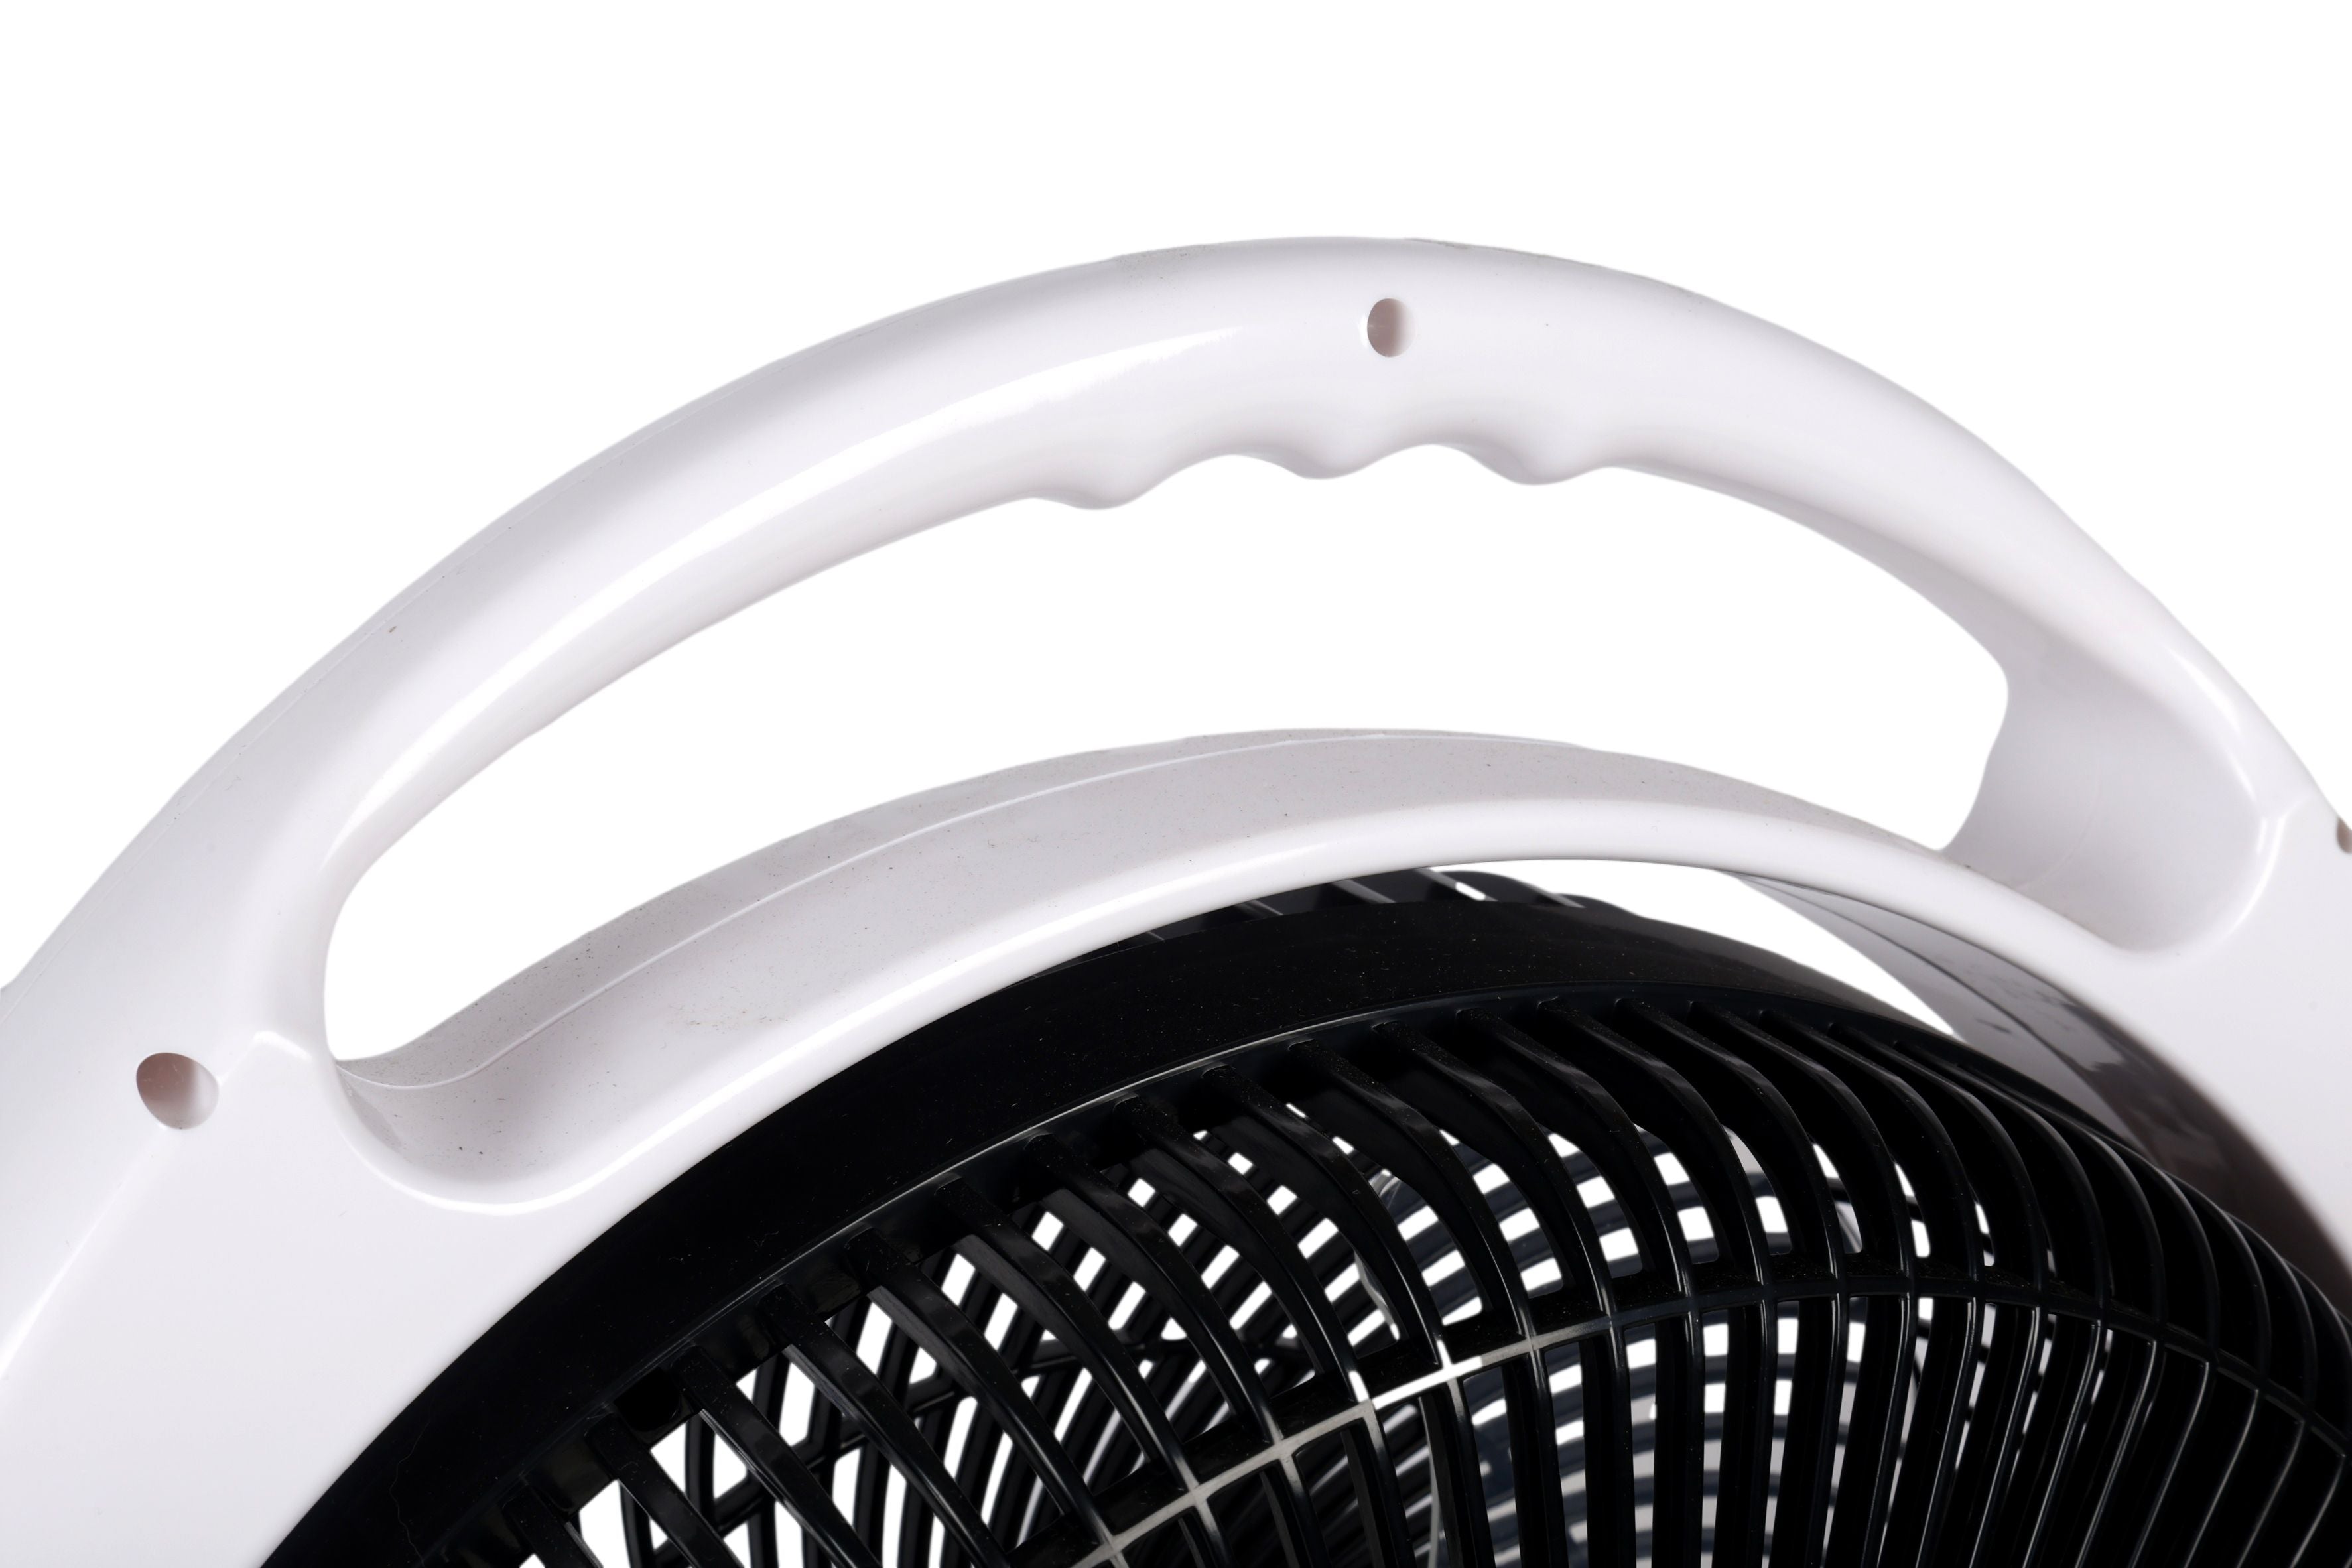 30CM RECHARGEABLE 12V FAN WITH LED LIGHTS AND POWER BANK FUNCTION